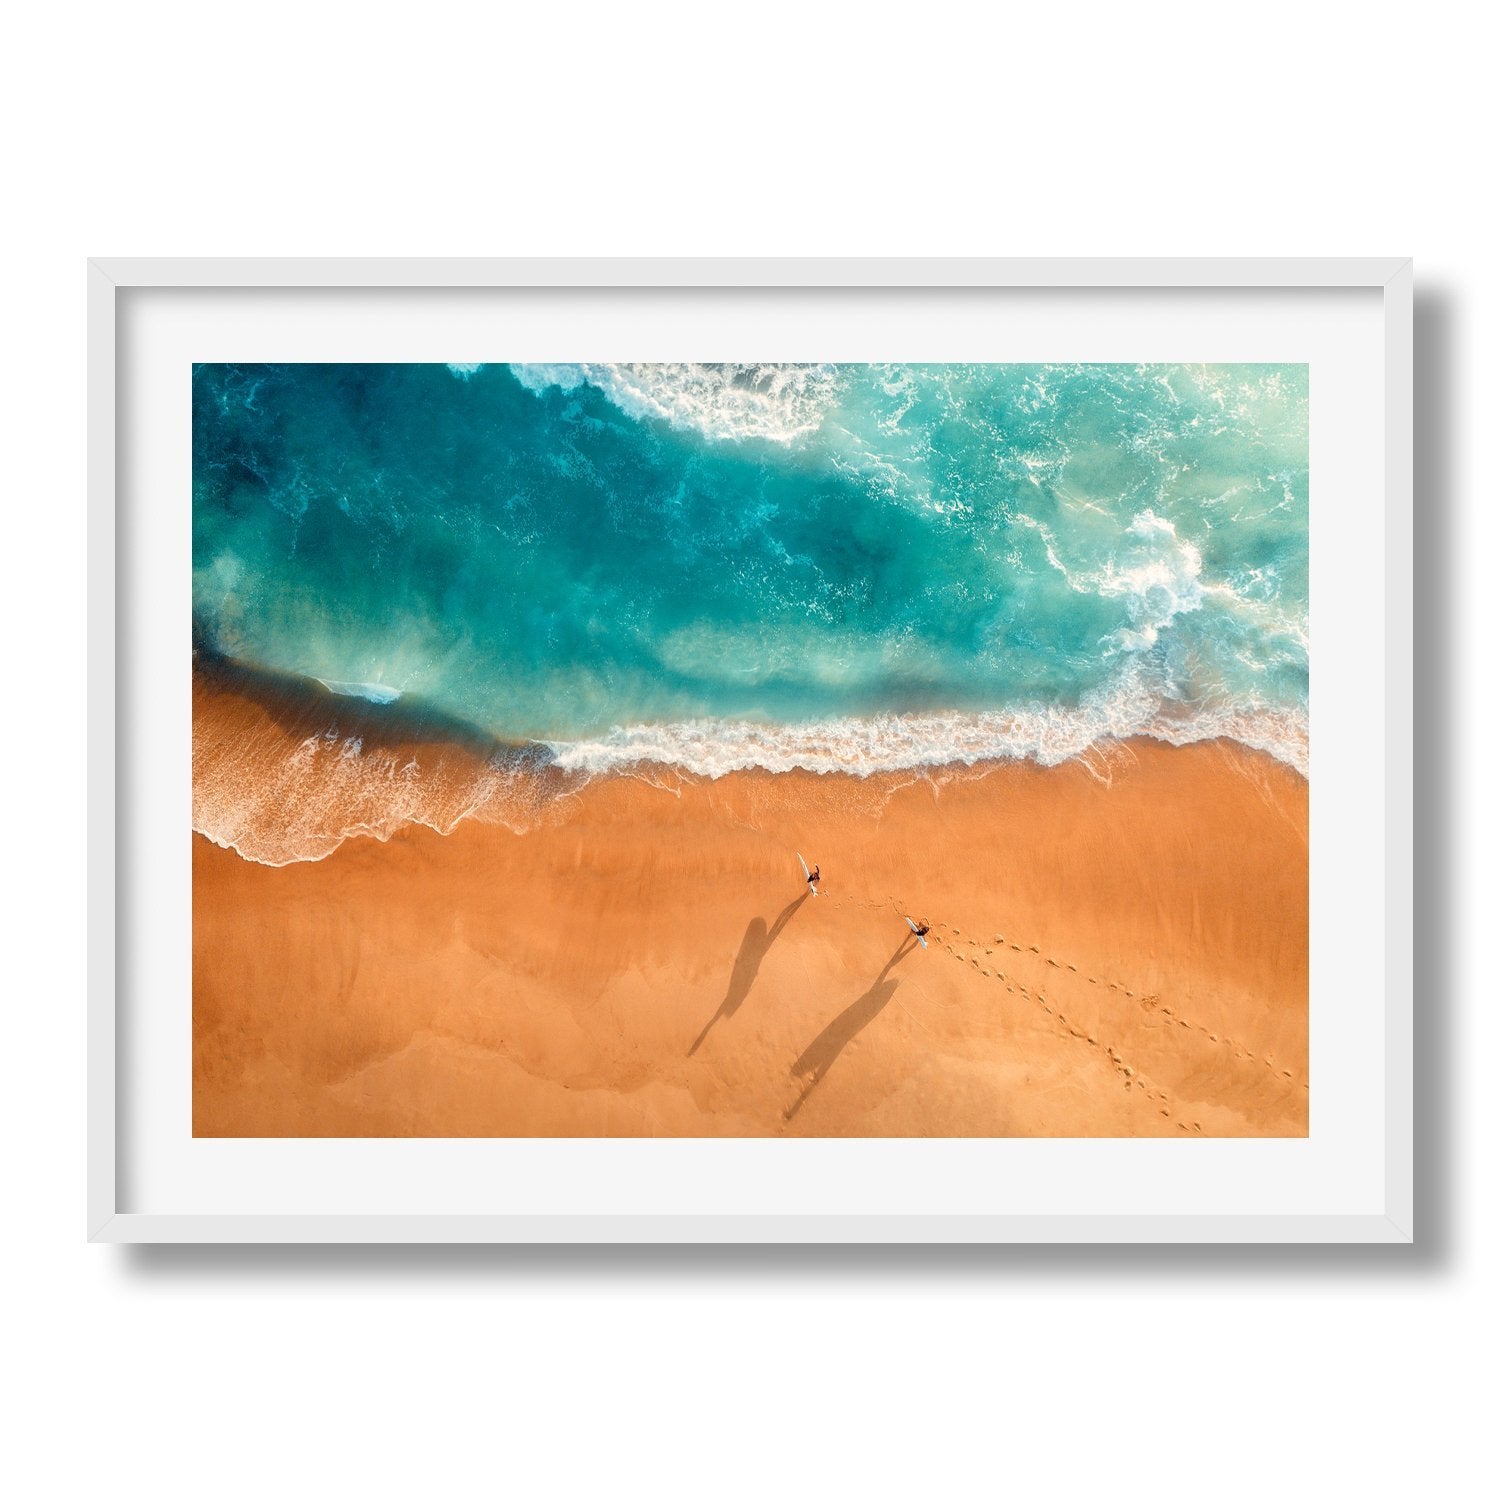 Two Surfers Premium Framed Print | Limited Production - Peter Yan Studio